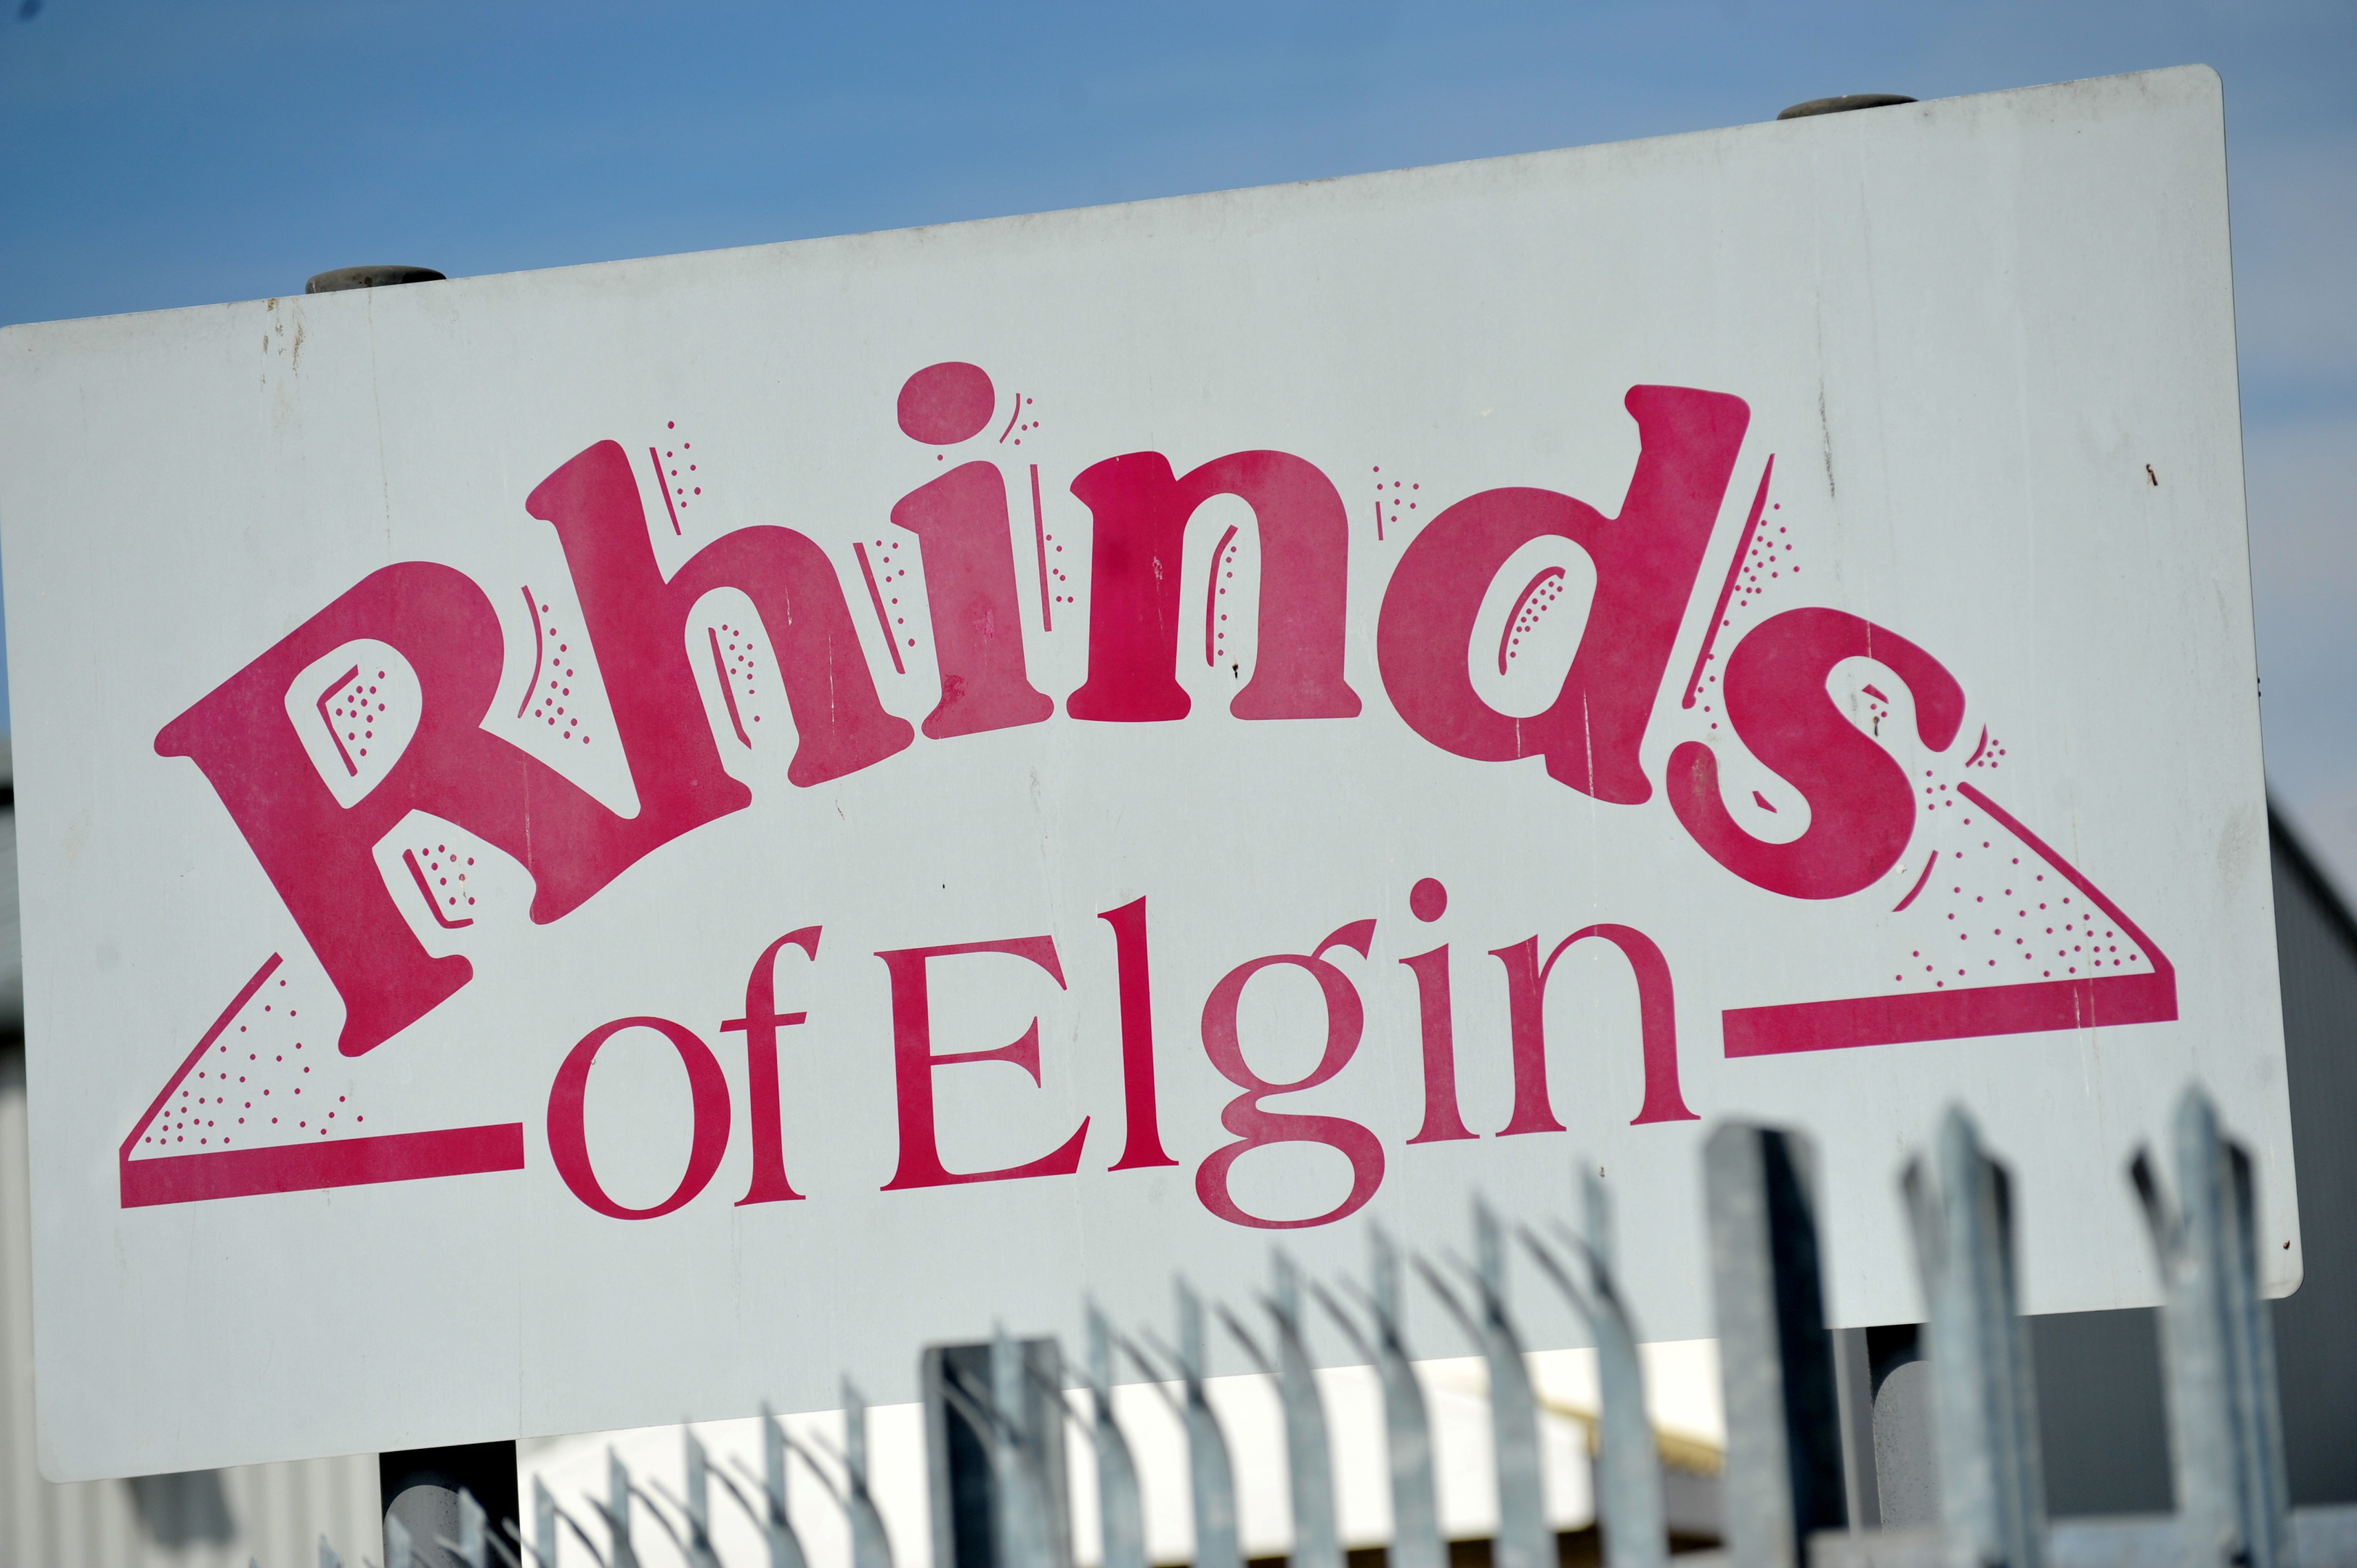 Rhinds of Elgin was bought by Dunbia in 2007.